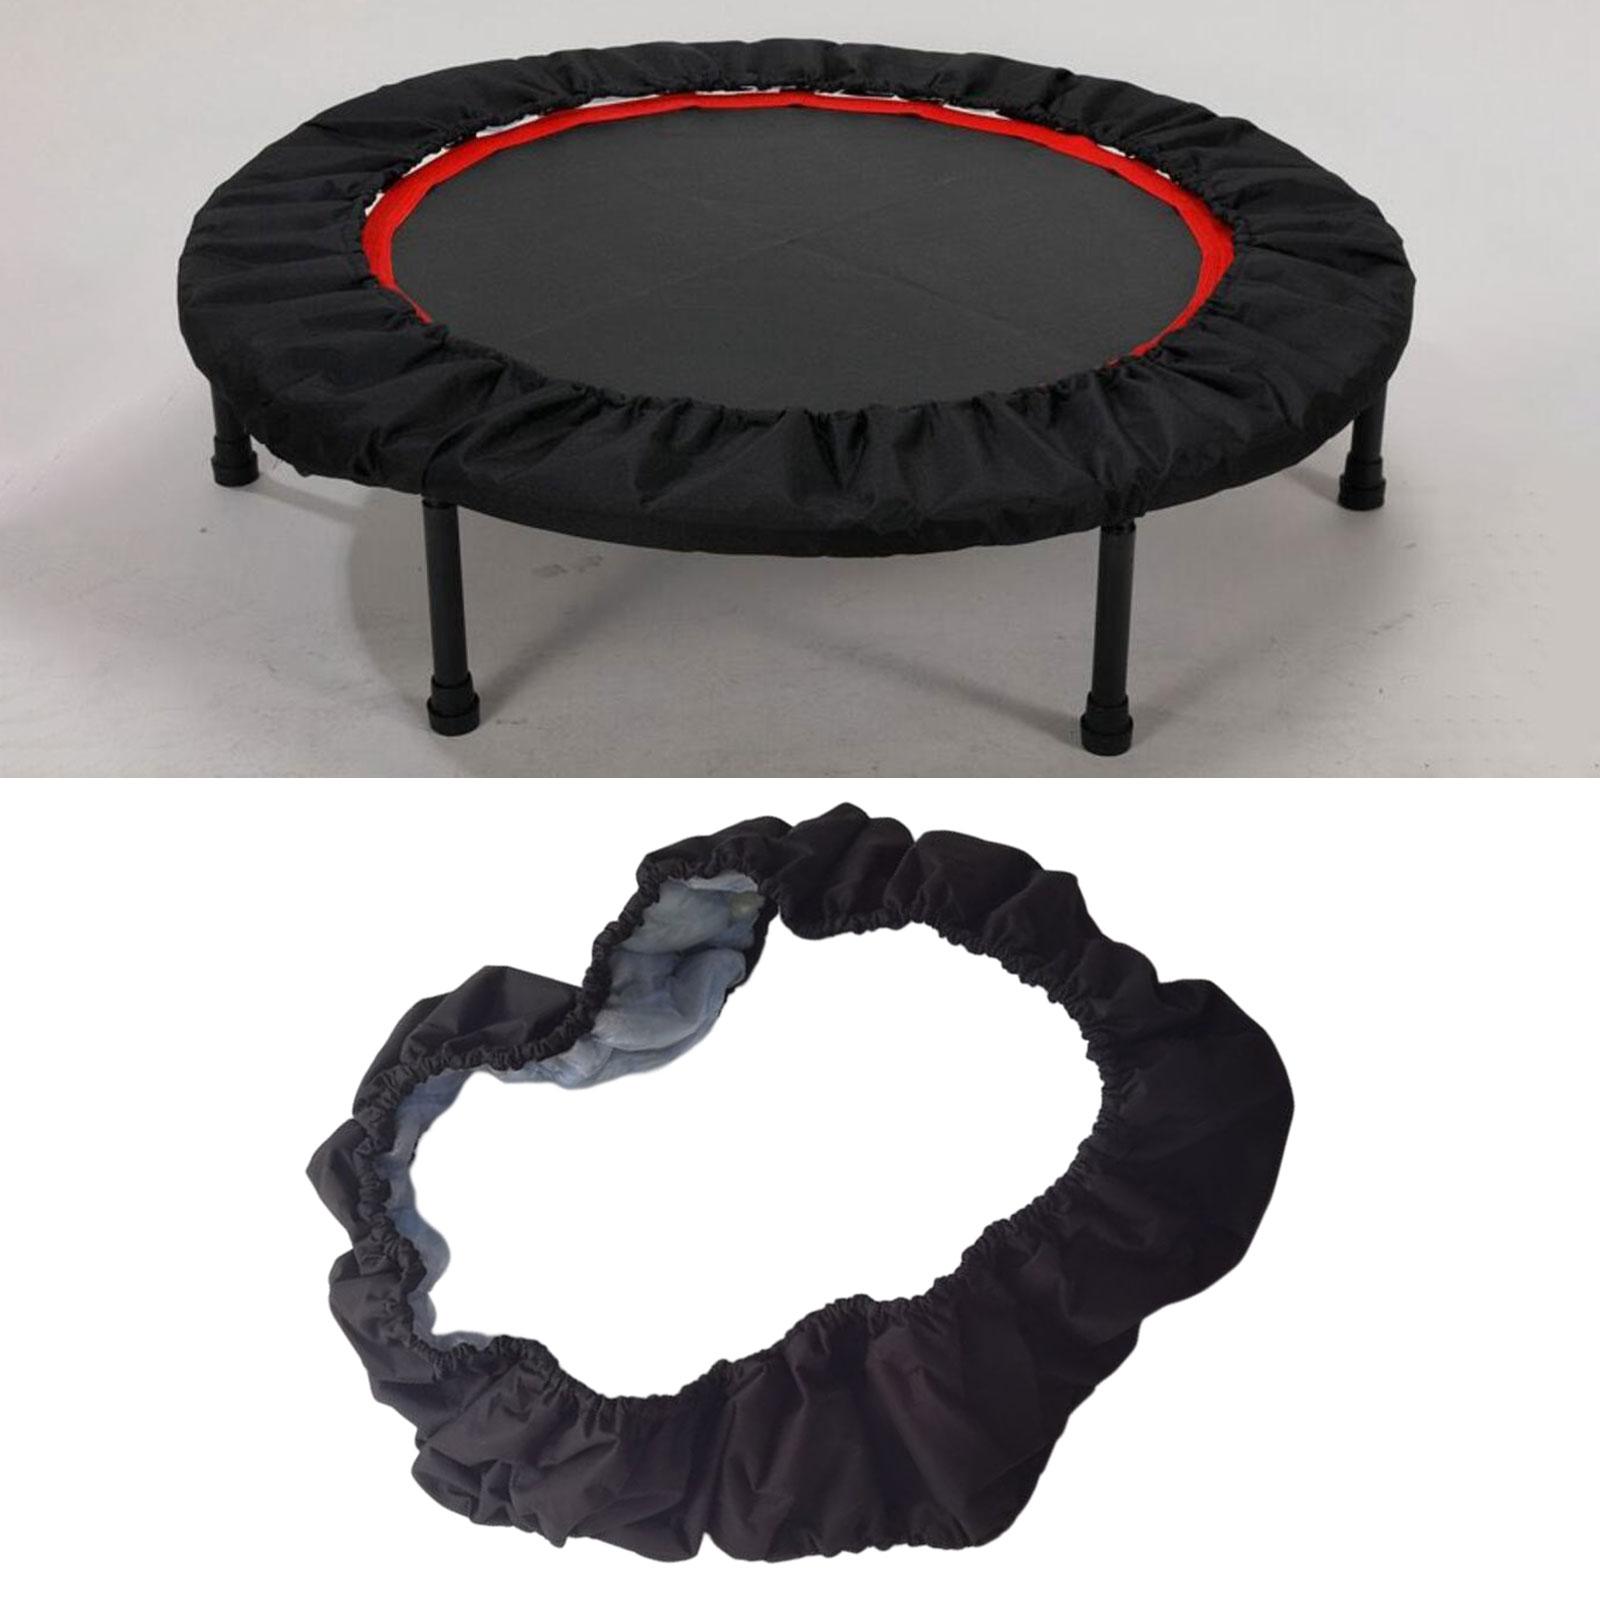 Trampoline Spring Cover Jumping Bed Cover Round Waterproof Easy to Install 60inch 10 Holes